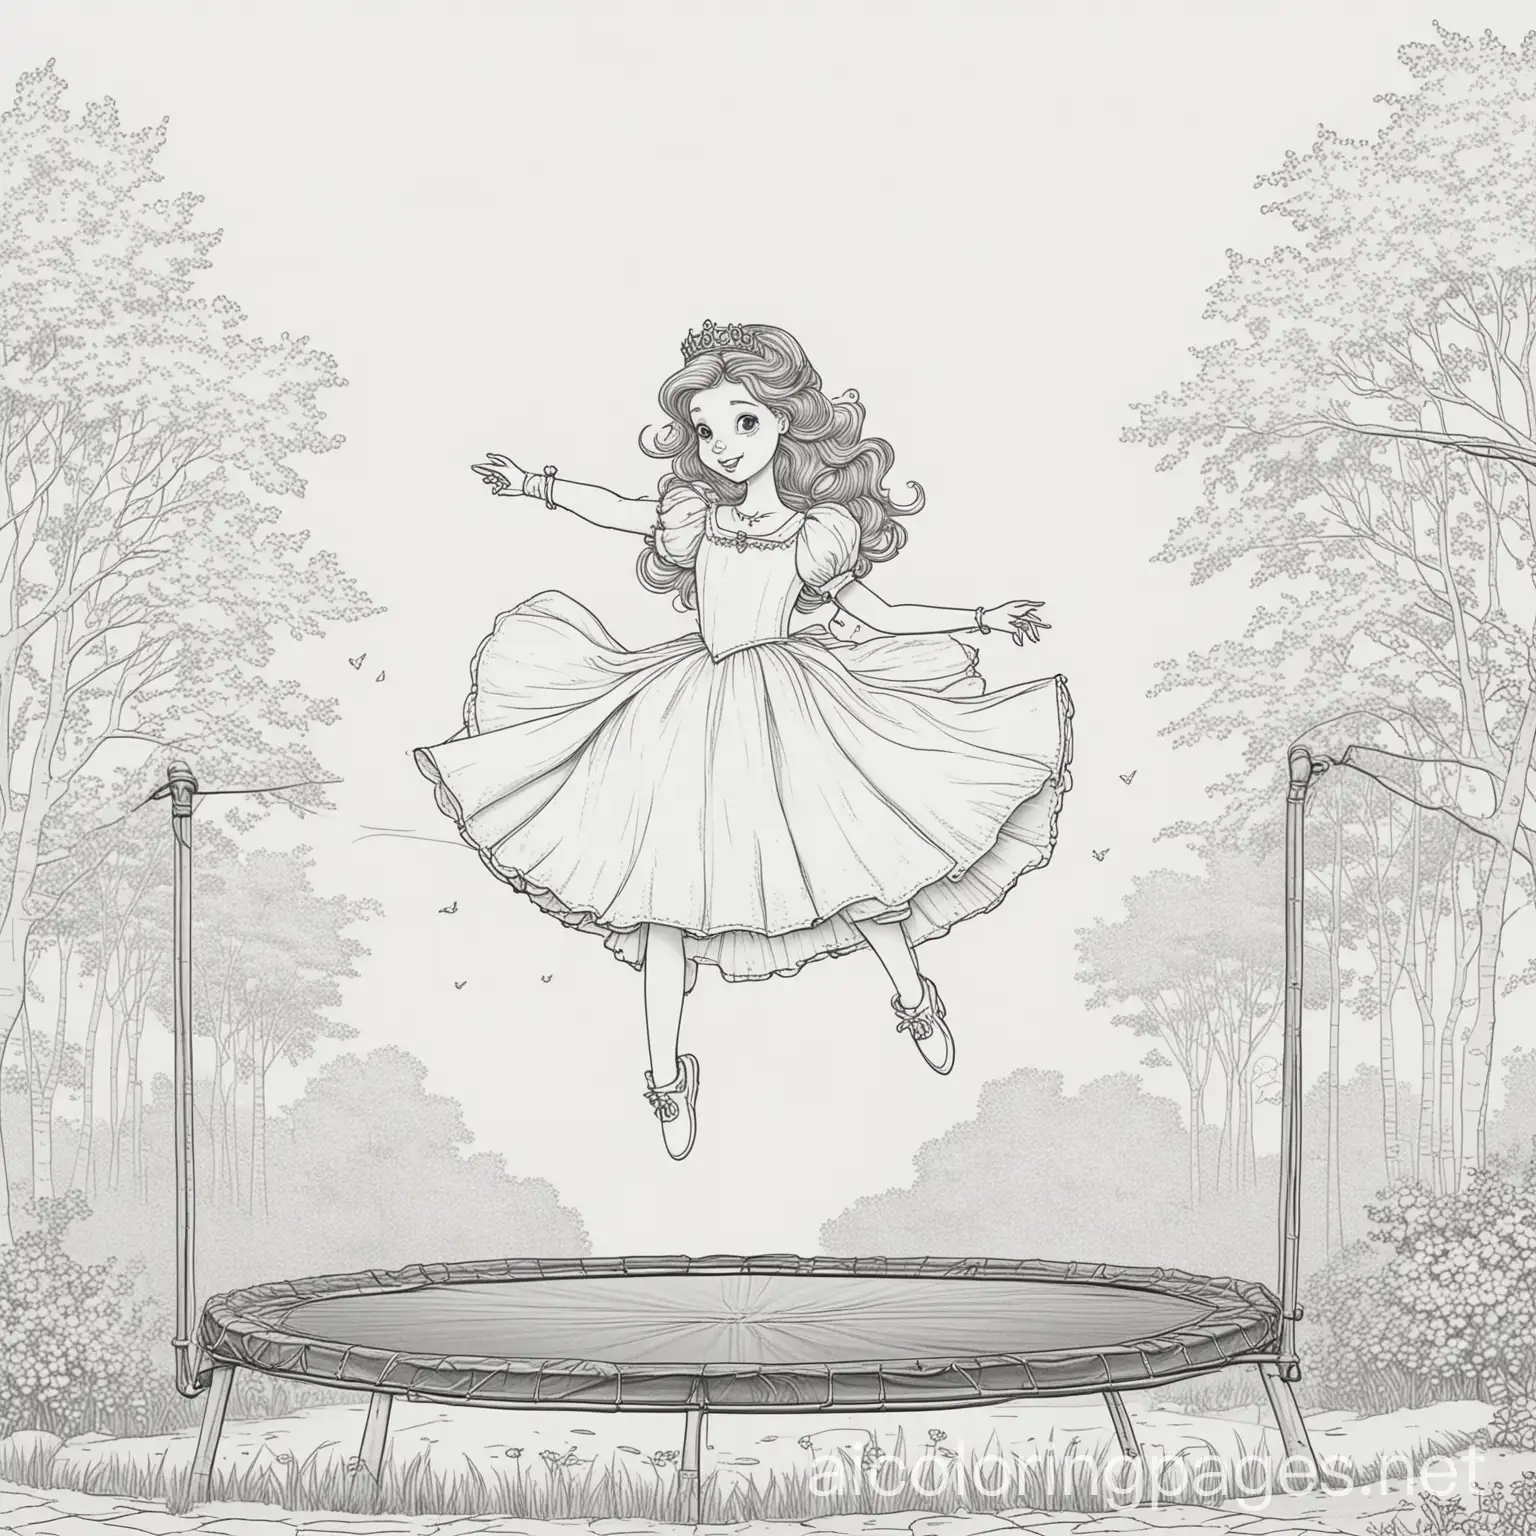 princess on a trampoline, Coloring Page, black and white, line art, white background, Simplicity, Ample White Space. The background of the coloring page is plain white to make it easy for young children to color within the lines. The outlines of all the subjects are easy to distinguish, making it simple for kids to color without too much difficulty